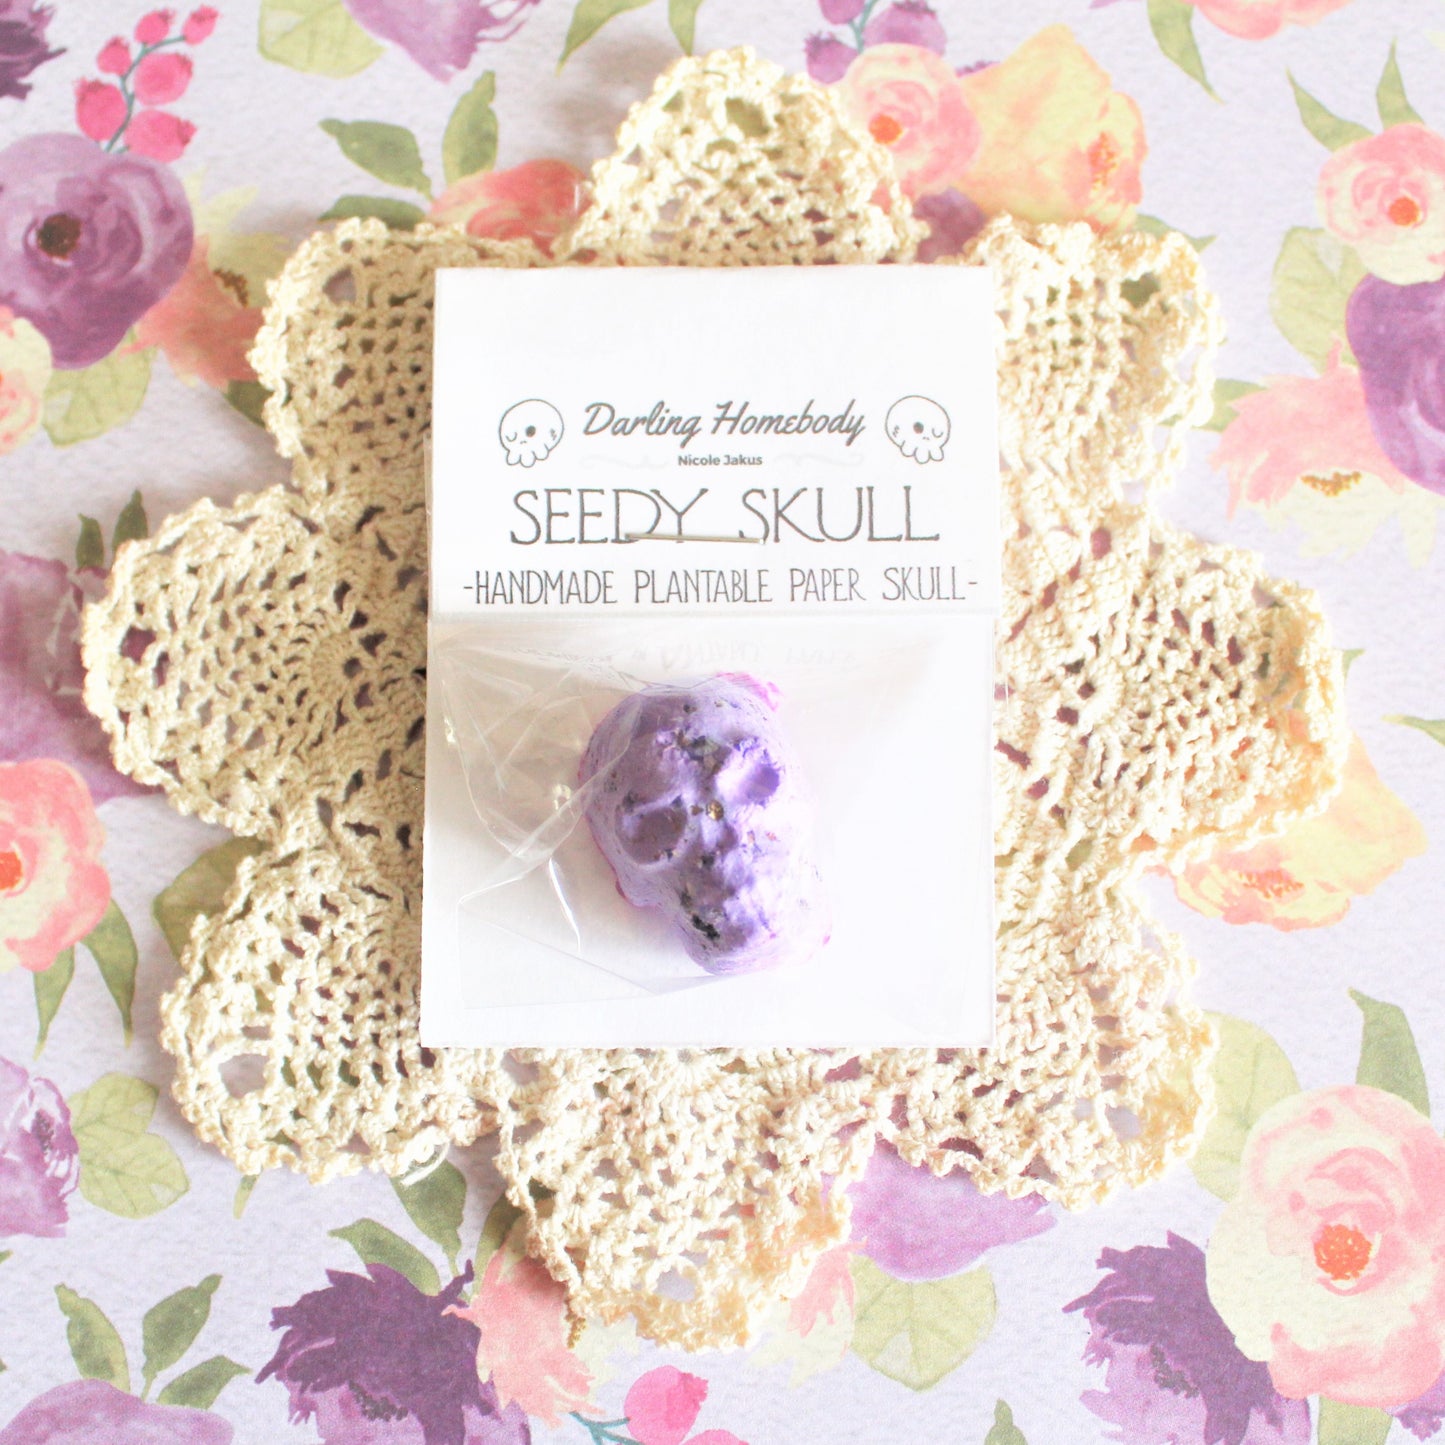 Single Purple Plantable Paper Skull / Seedy Skull Seed Bomb / Recycled Paper Pulp Craft / Spring Summer Small Gift / Wild Flowers